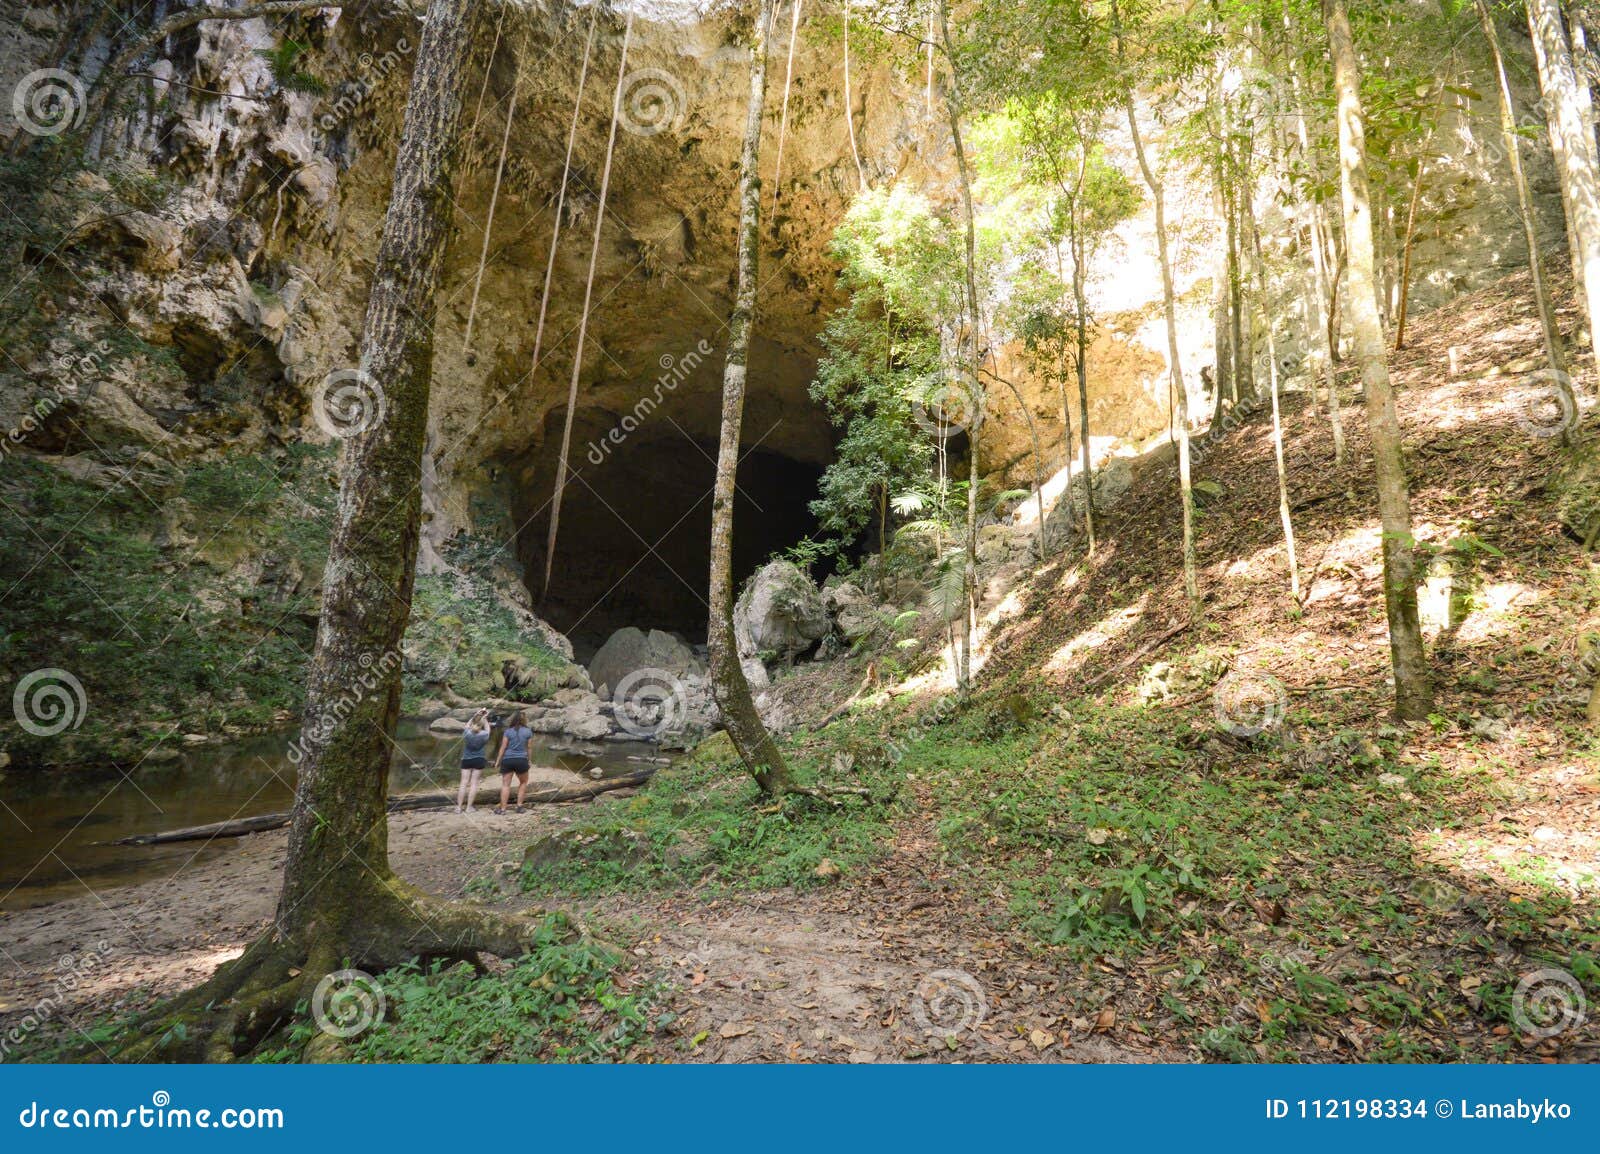 rio frio cave in the mountain pine ridge forest reserve in belize. central america